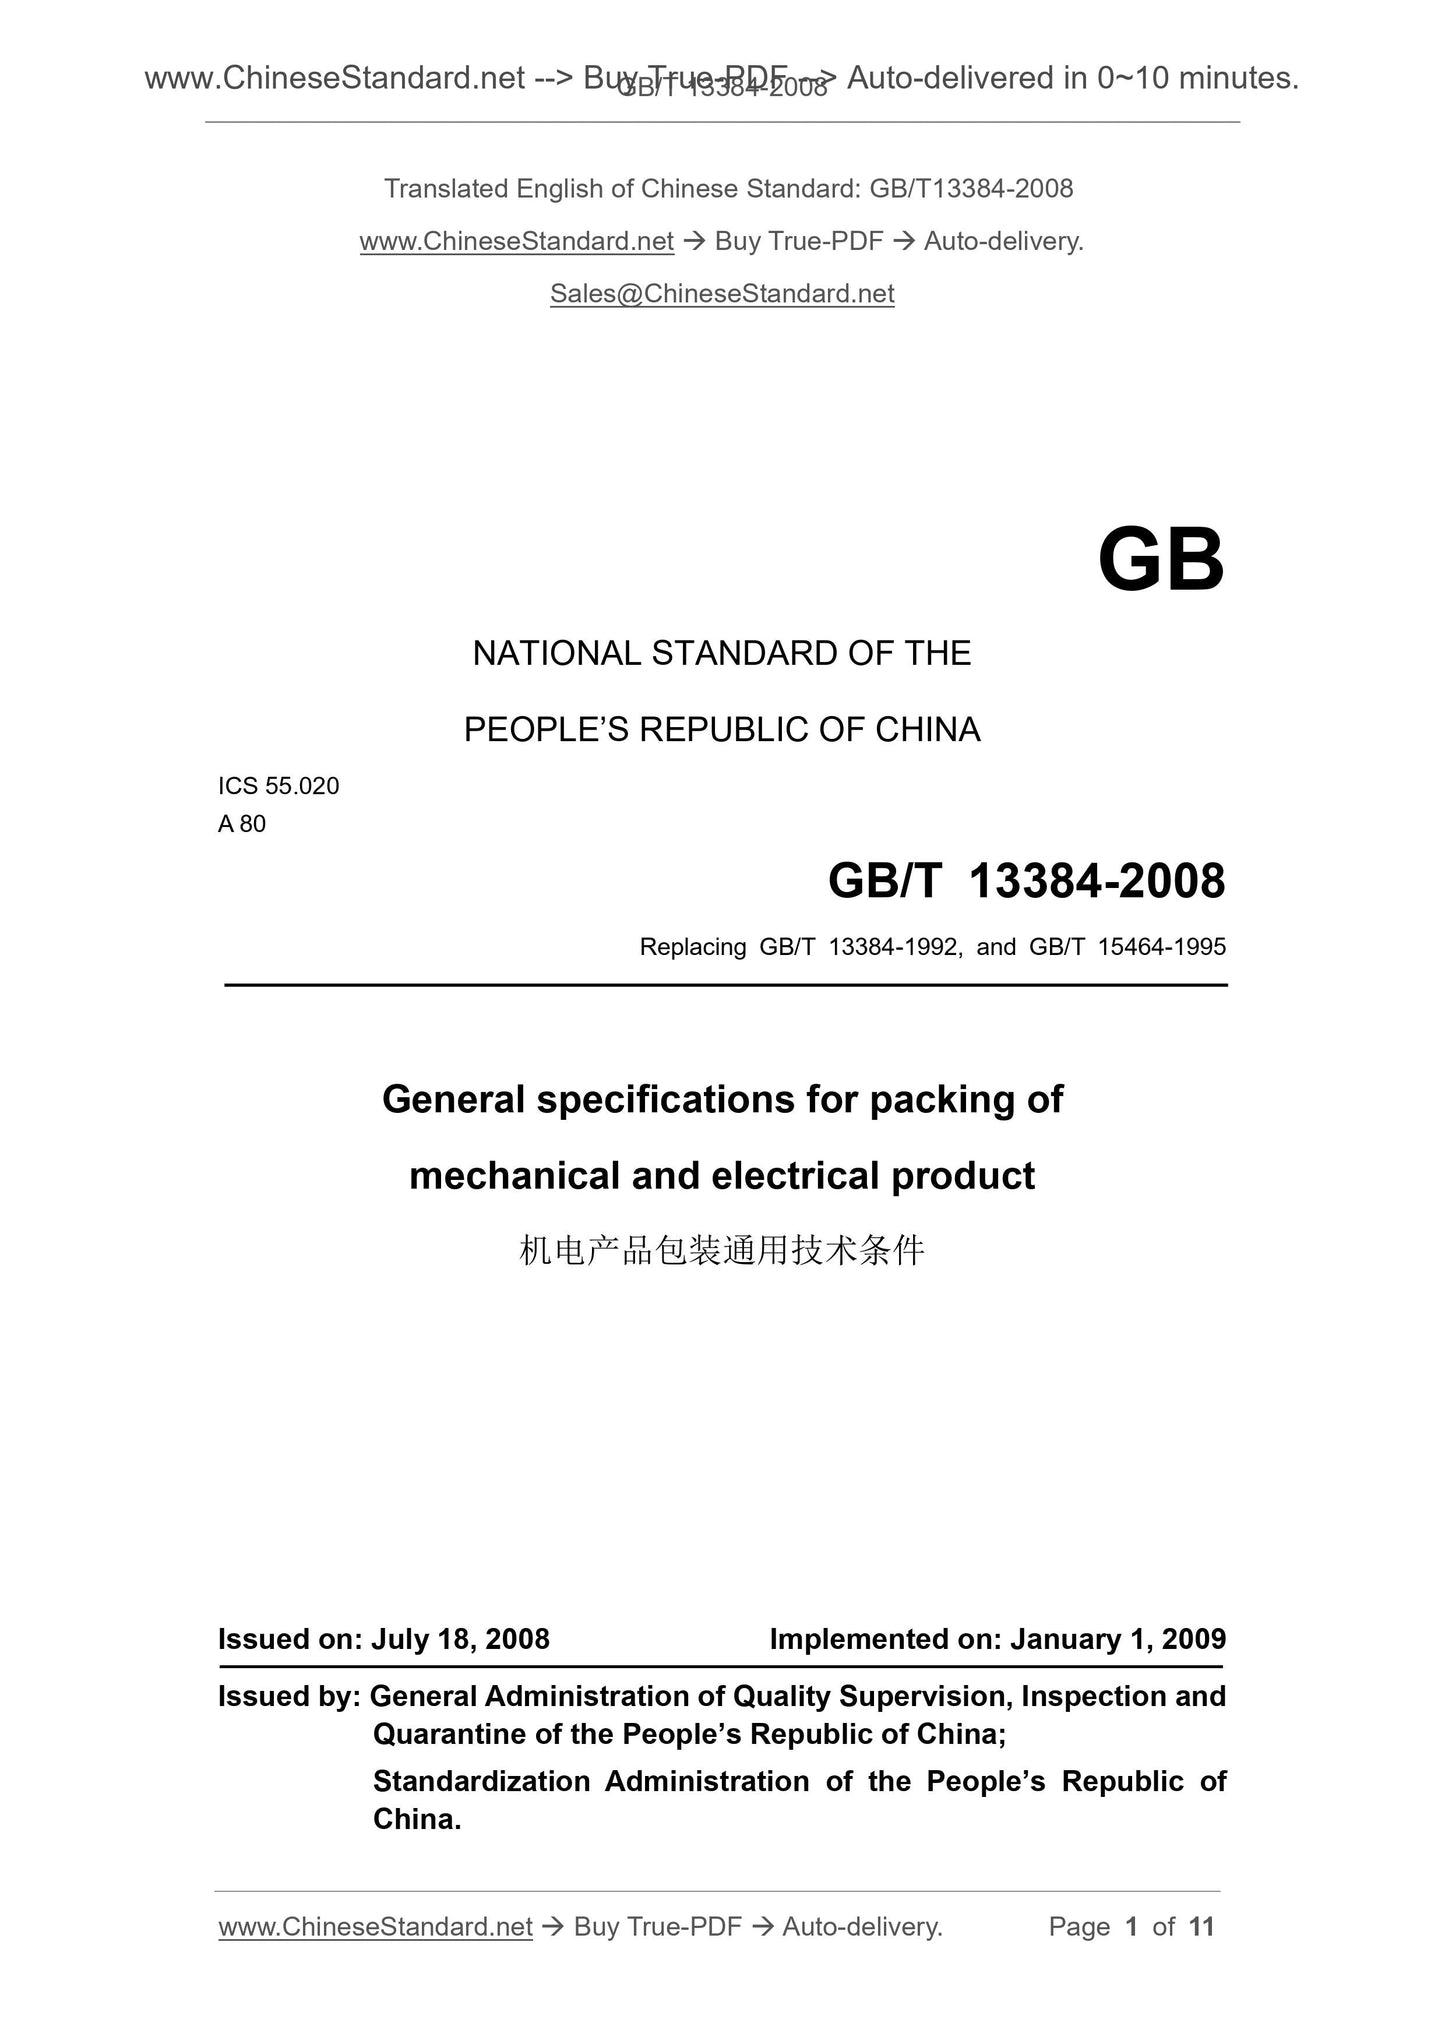 GB/T 13384-2008 Page 1